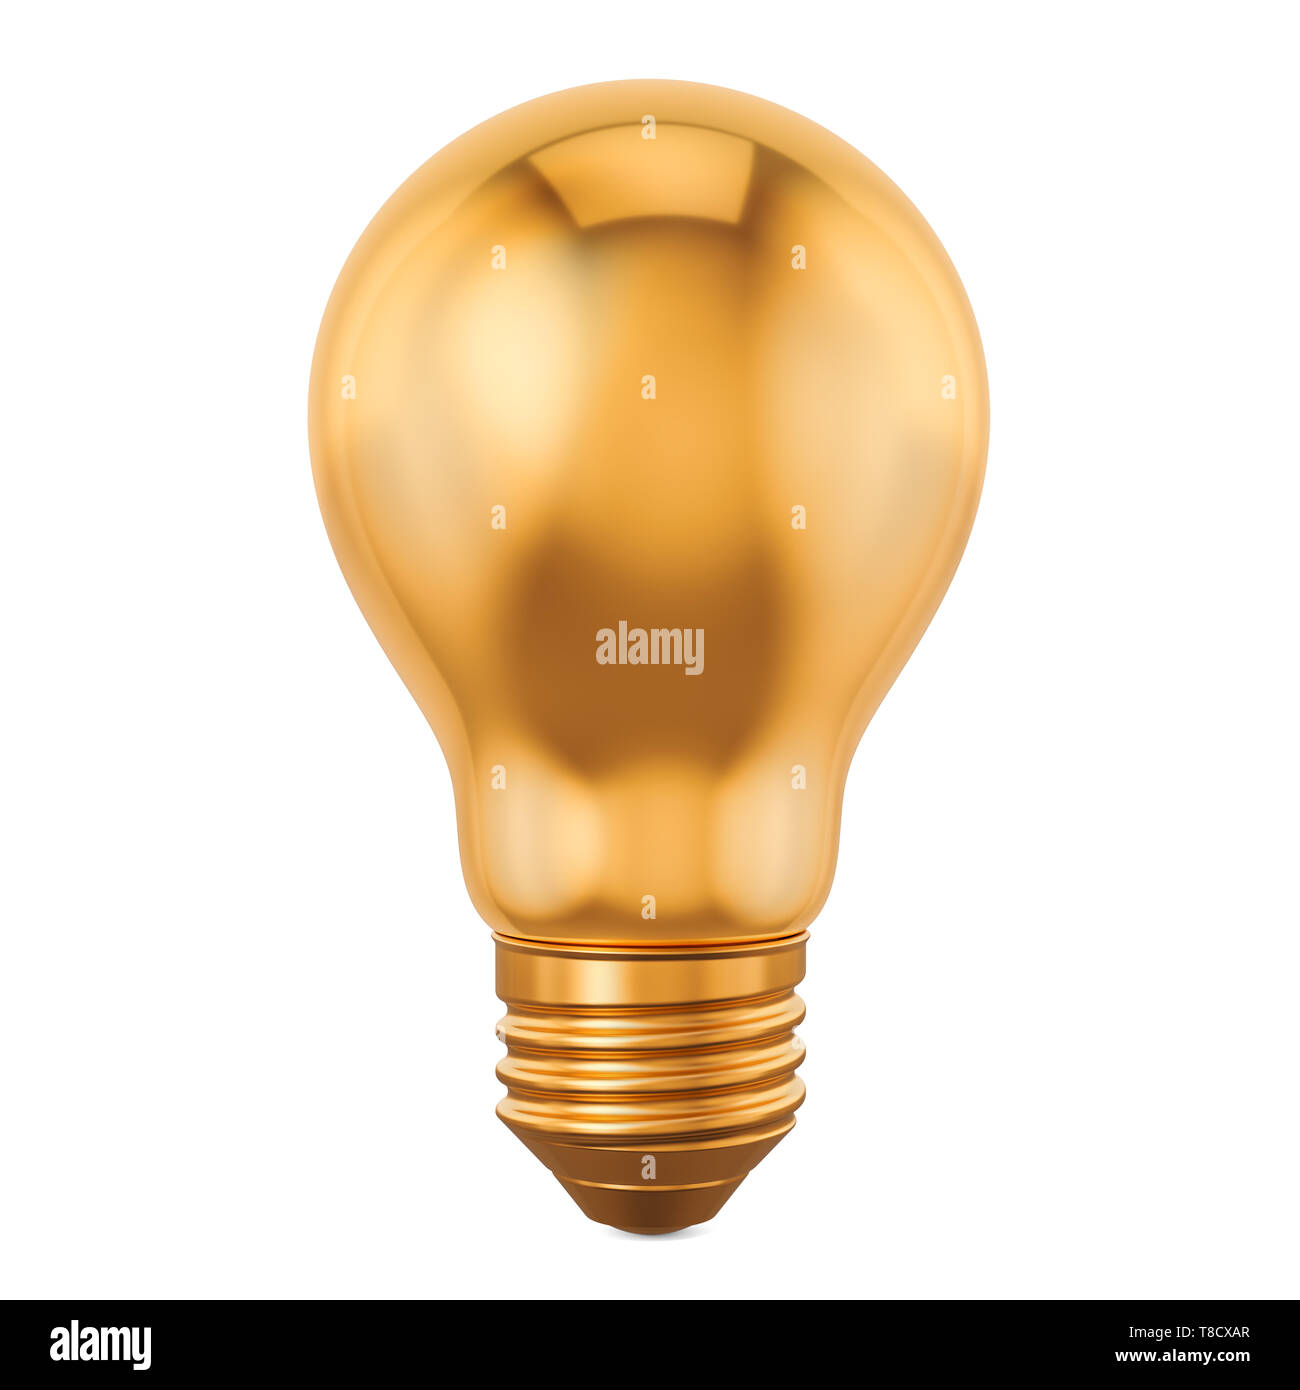 Golden light bulb, idea concept. 3D rendering isolated on white background Stock Photo